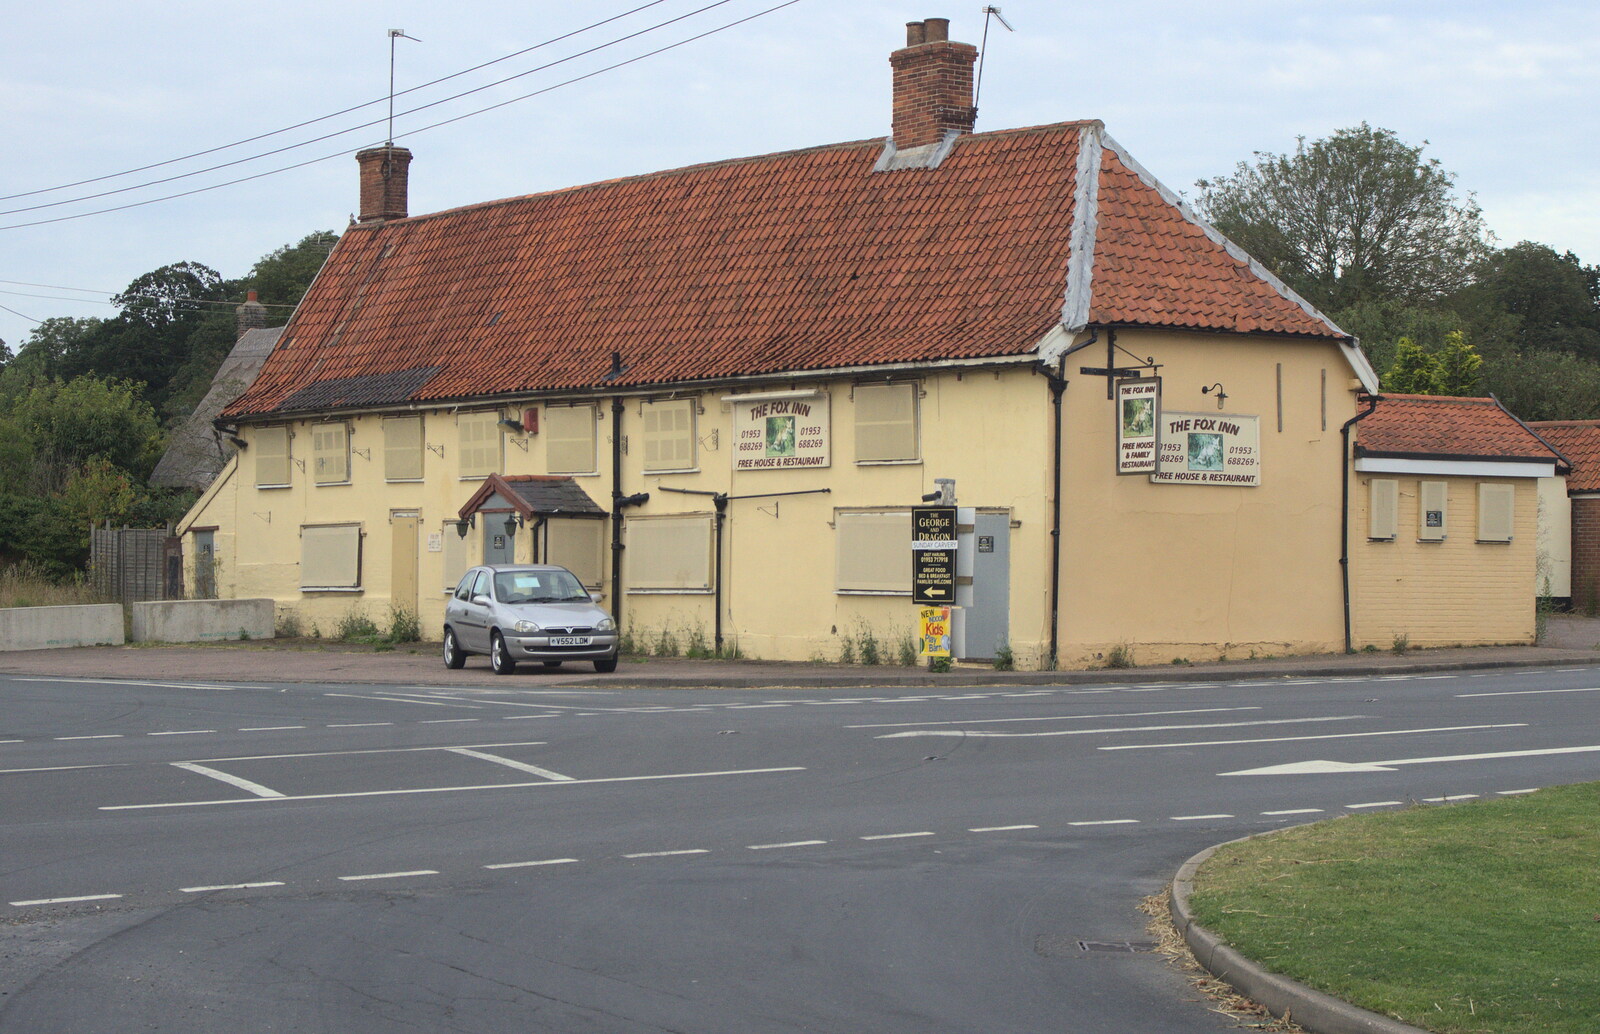 The boarded up Fox Inn at Garboldisham from Camping at Dower House, West Harling, Norfolk - 1st September 2012